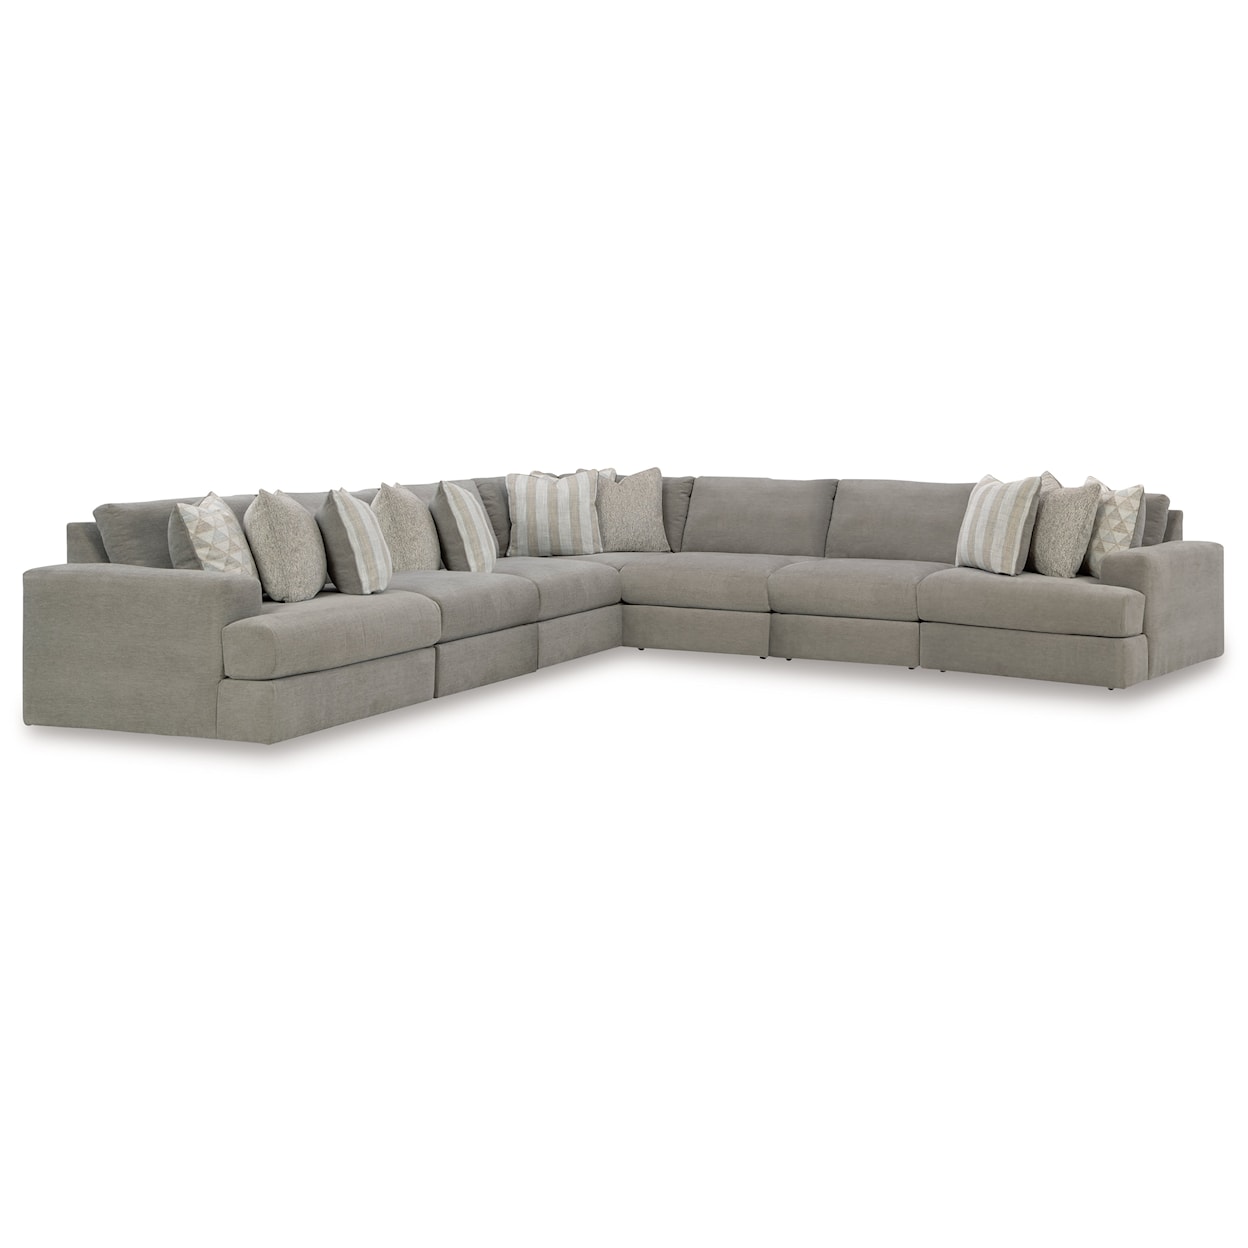 Signature Design by Ashley Furniture Avaliyah 7-Piece Sectional